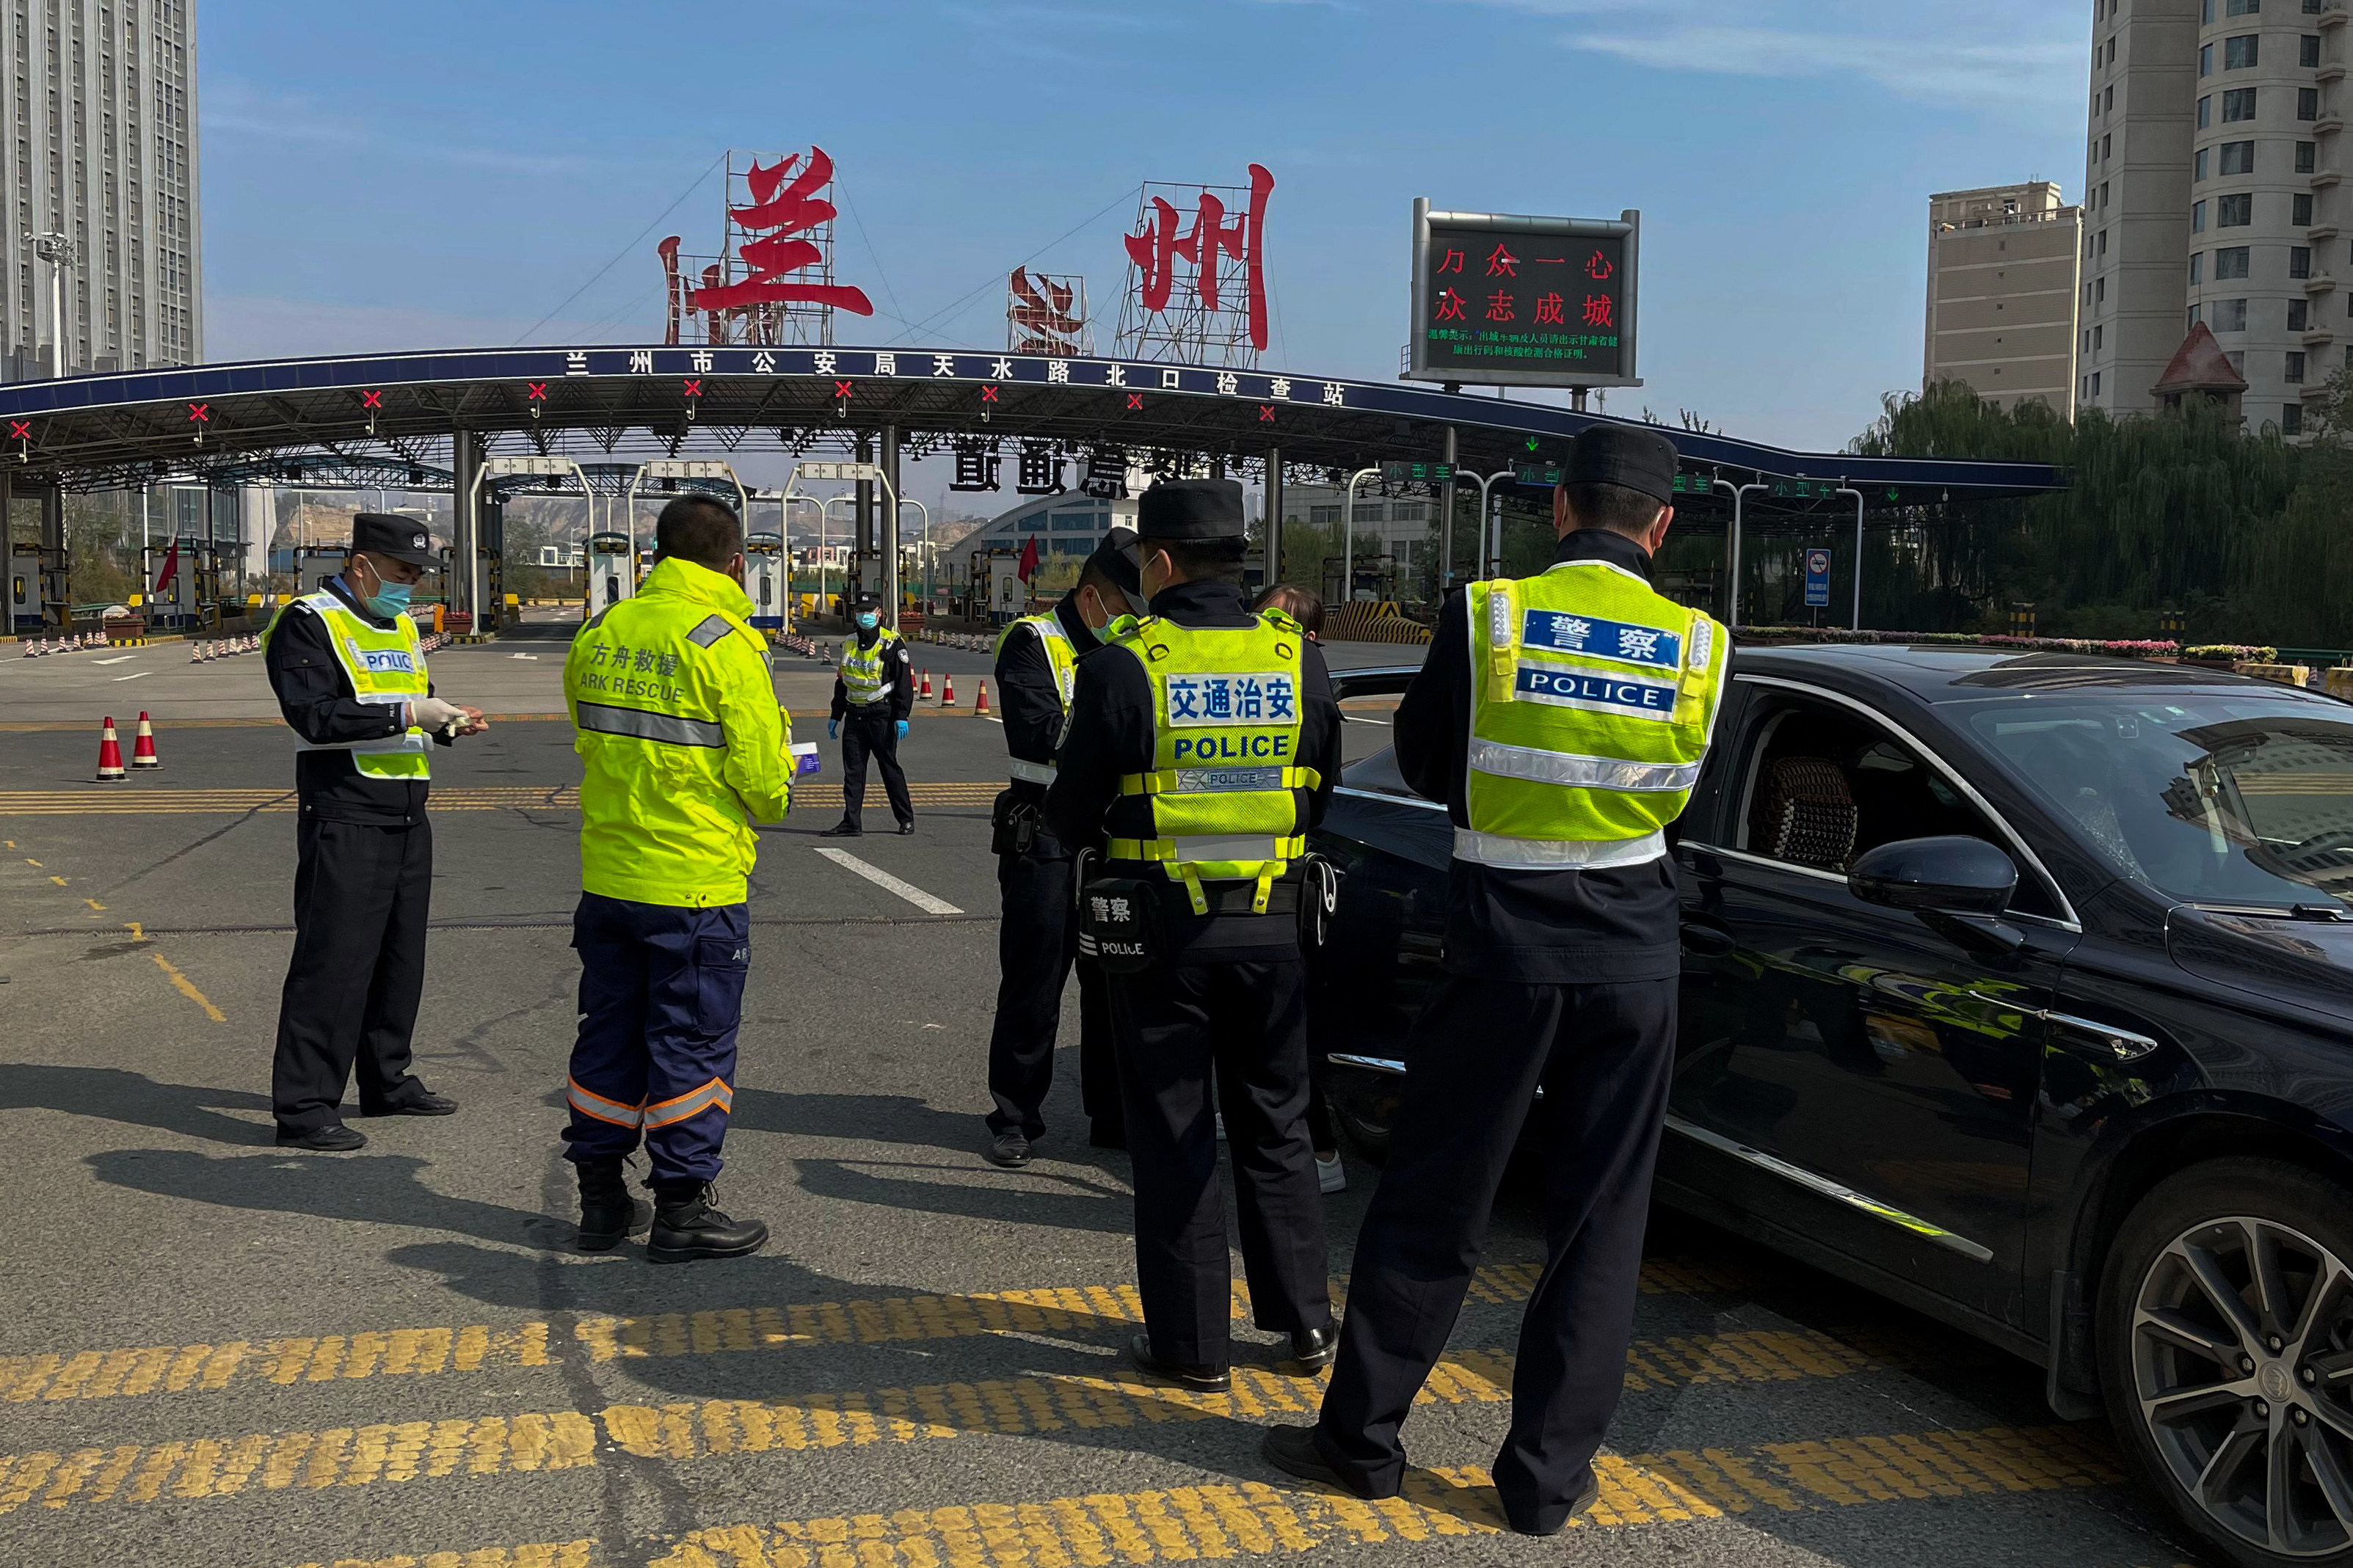 China’s zero-Covid policy is under scrutiny again after an anguished father pleaded with indifferent local authorities for help while his son was dying from gas poisoning. Photo: AFP